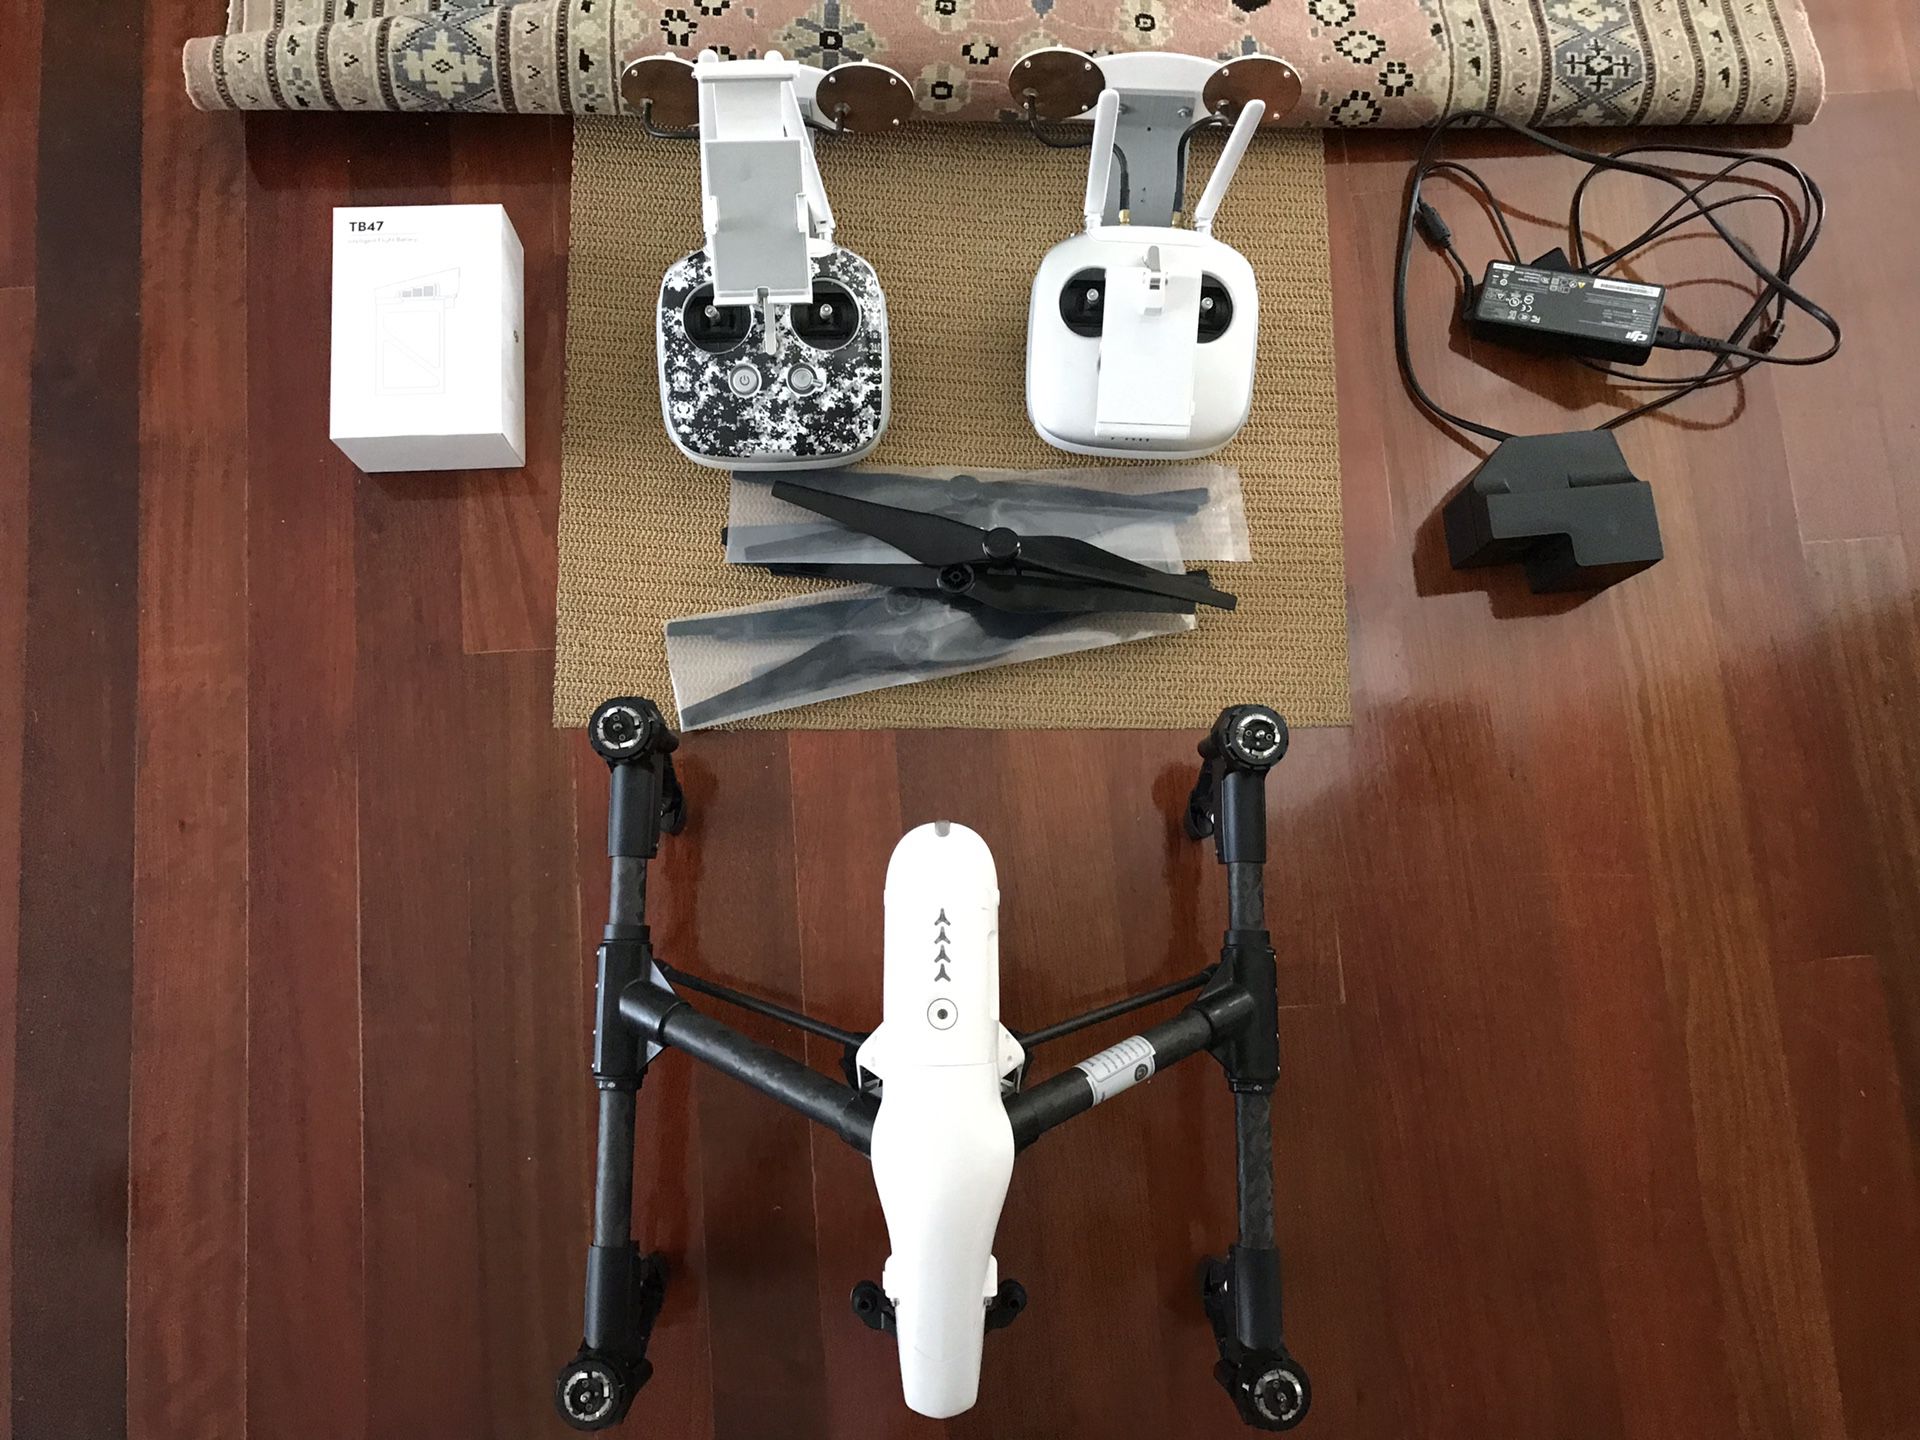 DJI INSPIRE 1 with 4K camera, 2 remotes, batteries and charger.